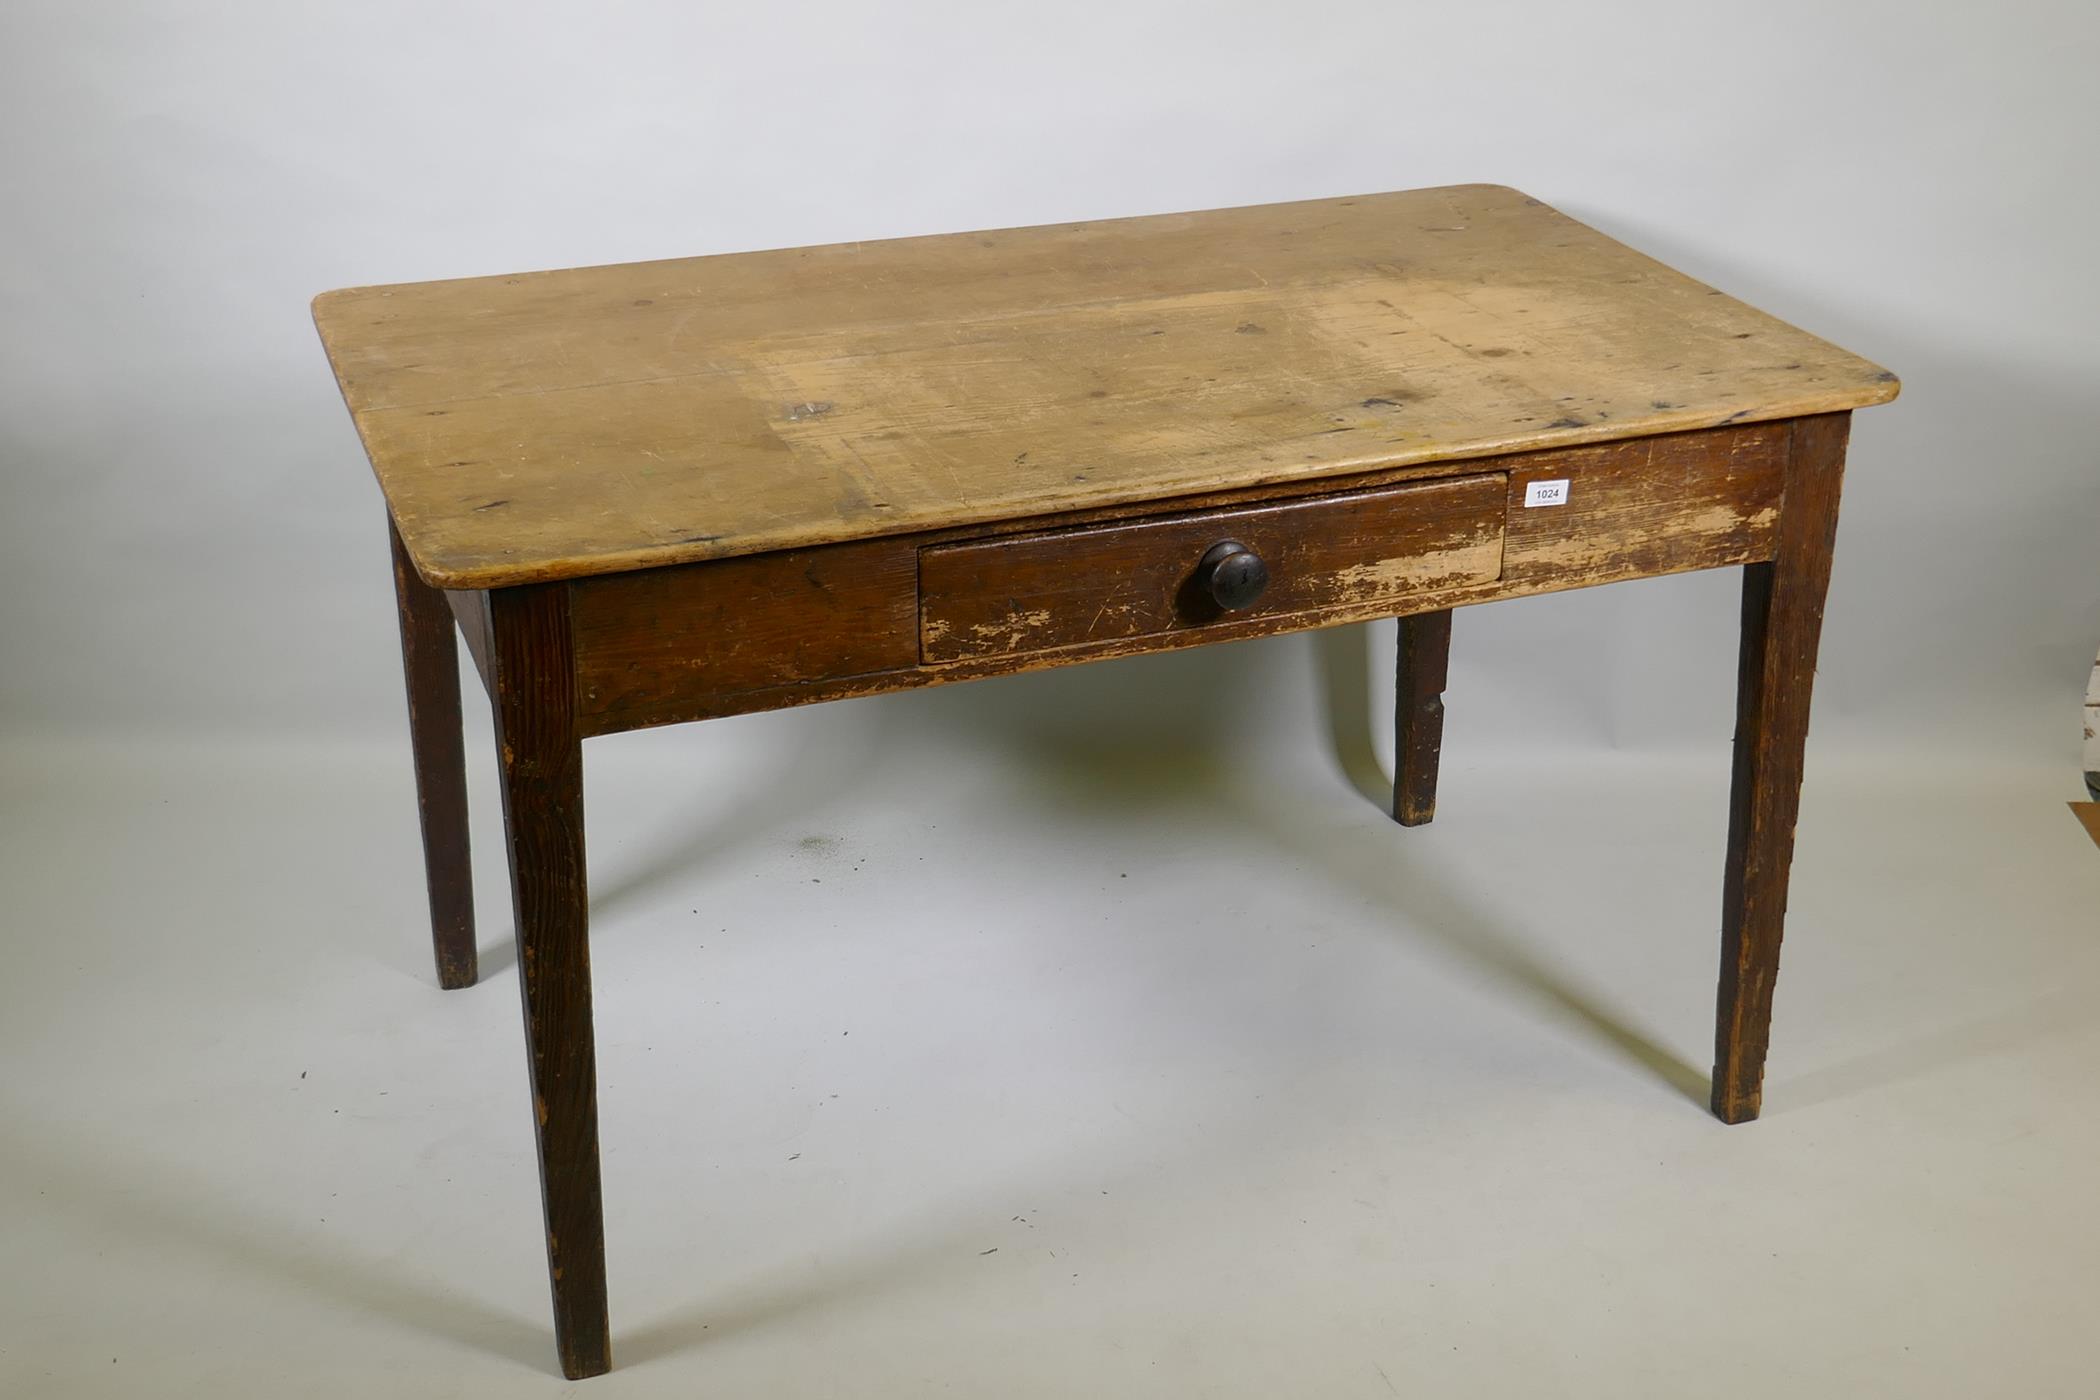 An early C19th pine scullery table with single drawer and scrubbed top, raised on tapering supports, - Image 3 of 3